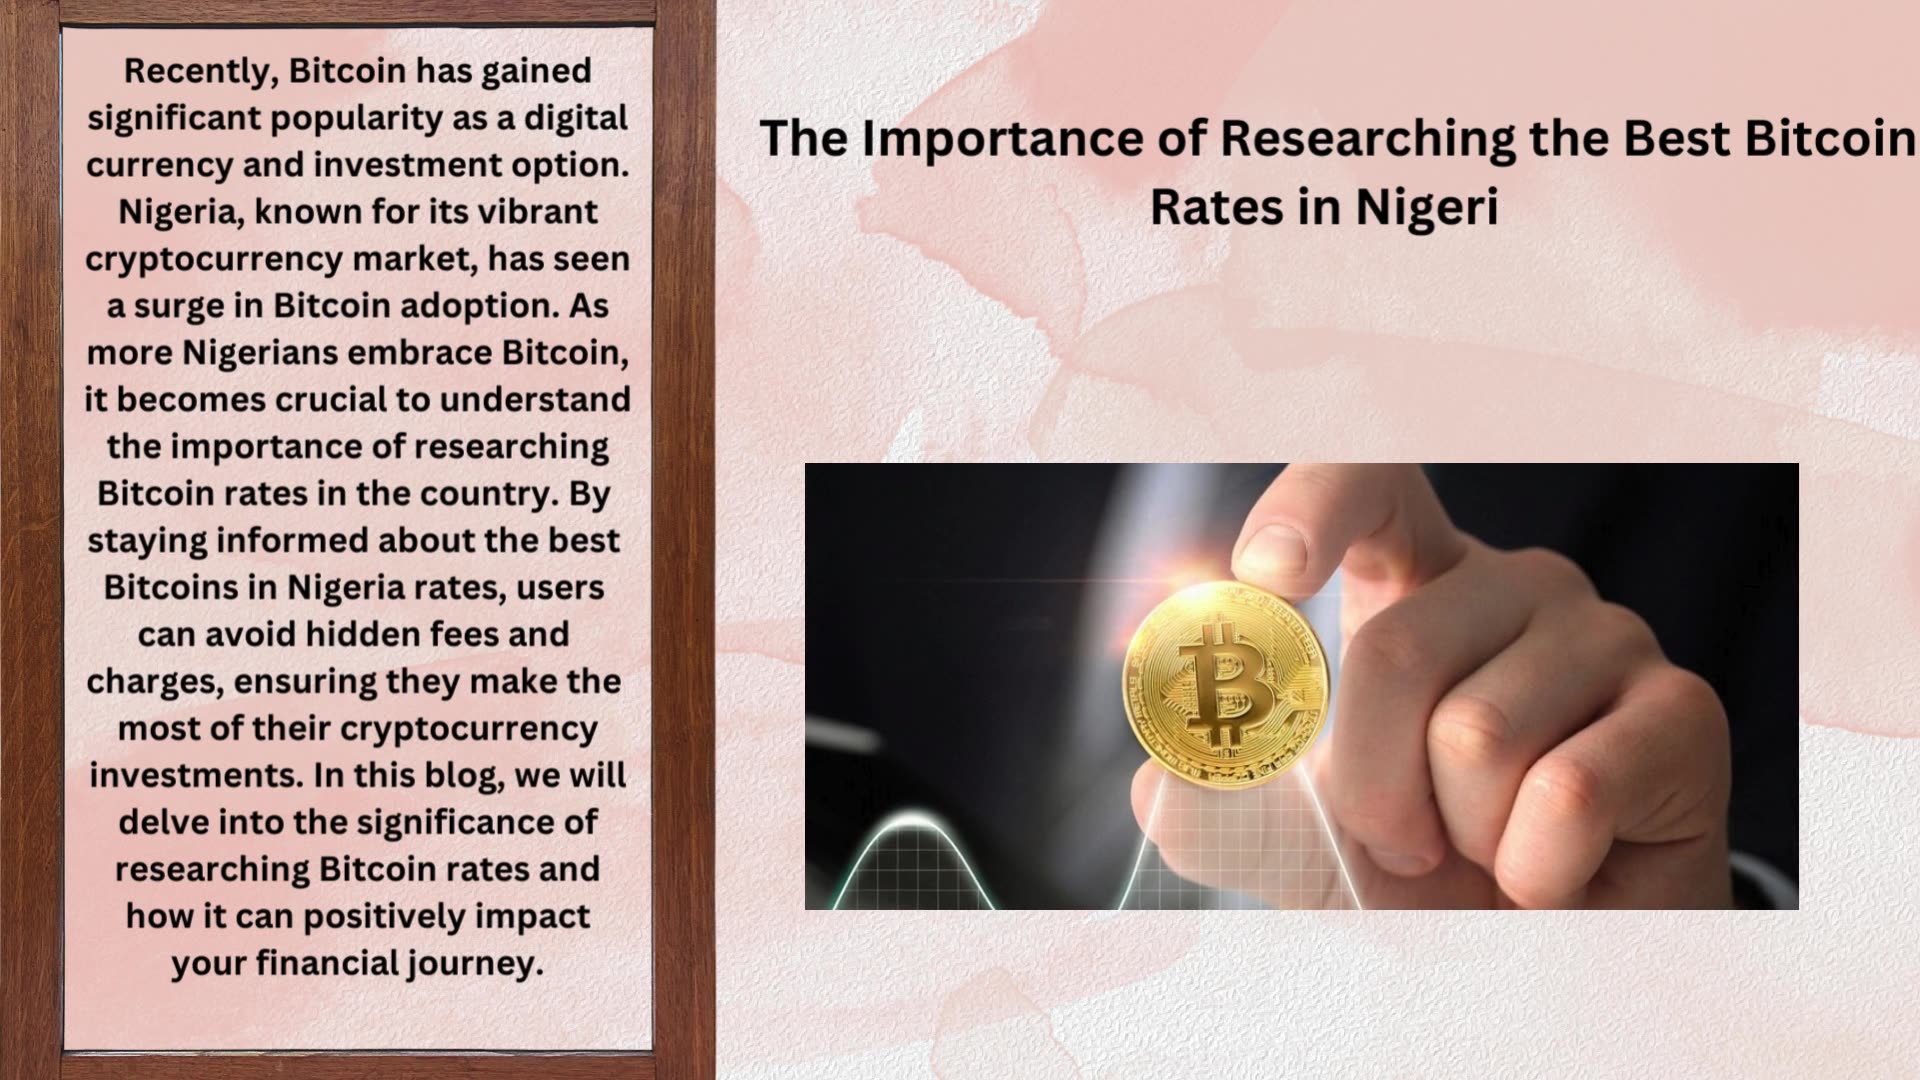 Sell your Bitcoin in Nigeria for instant cash